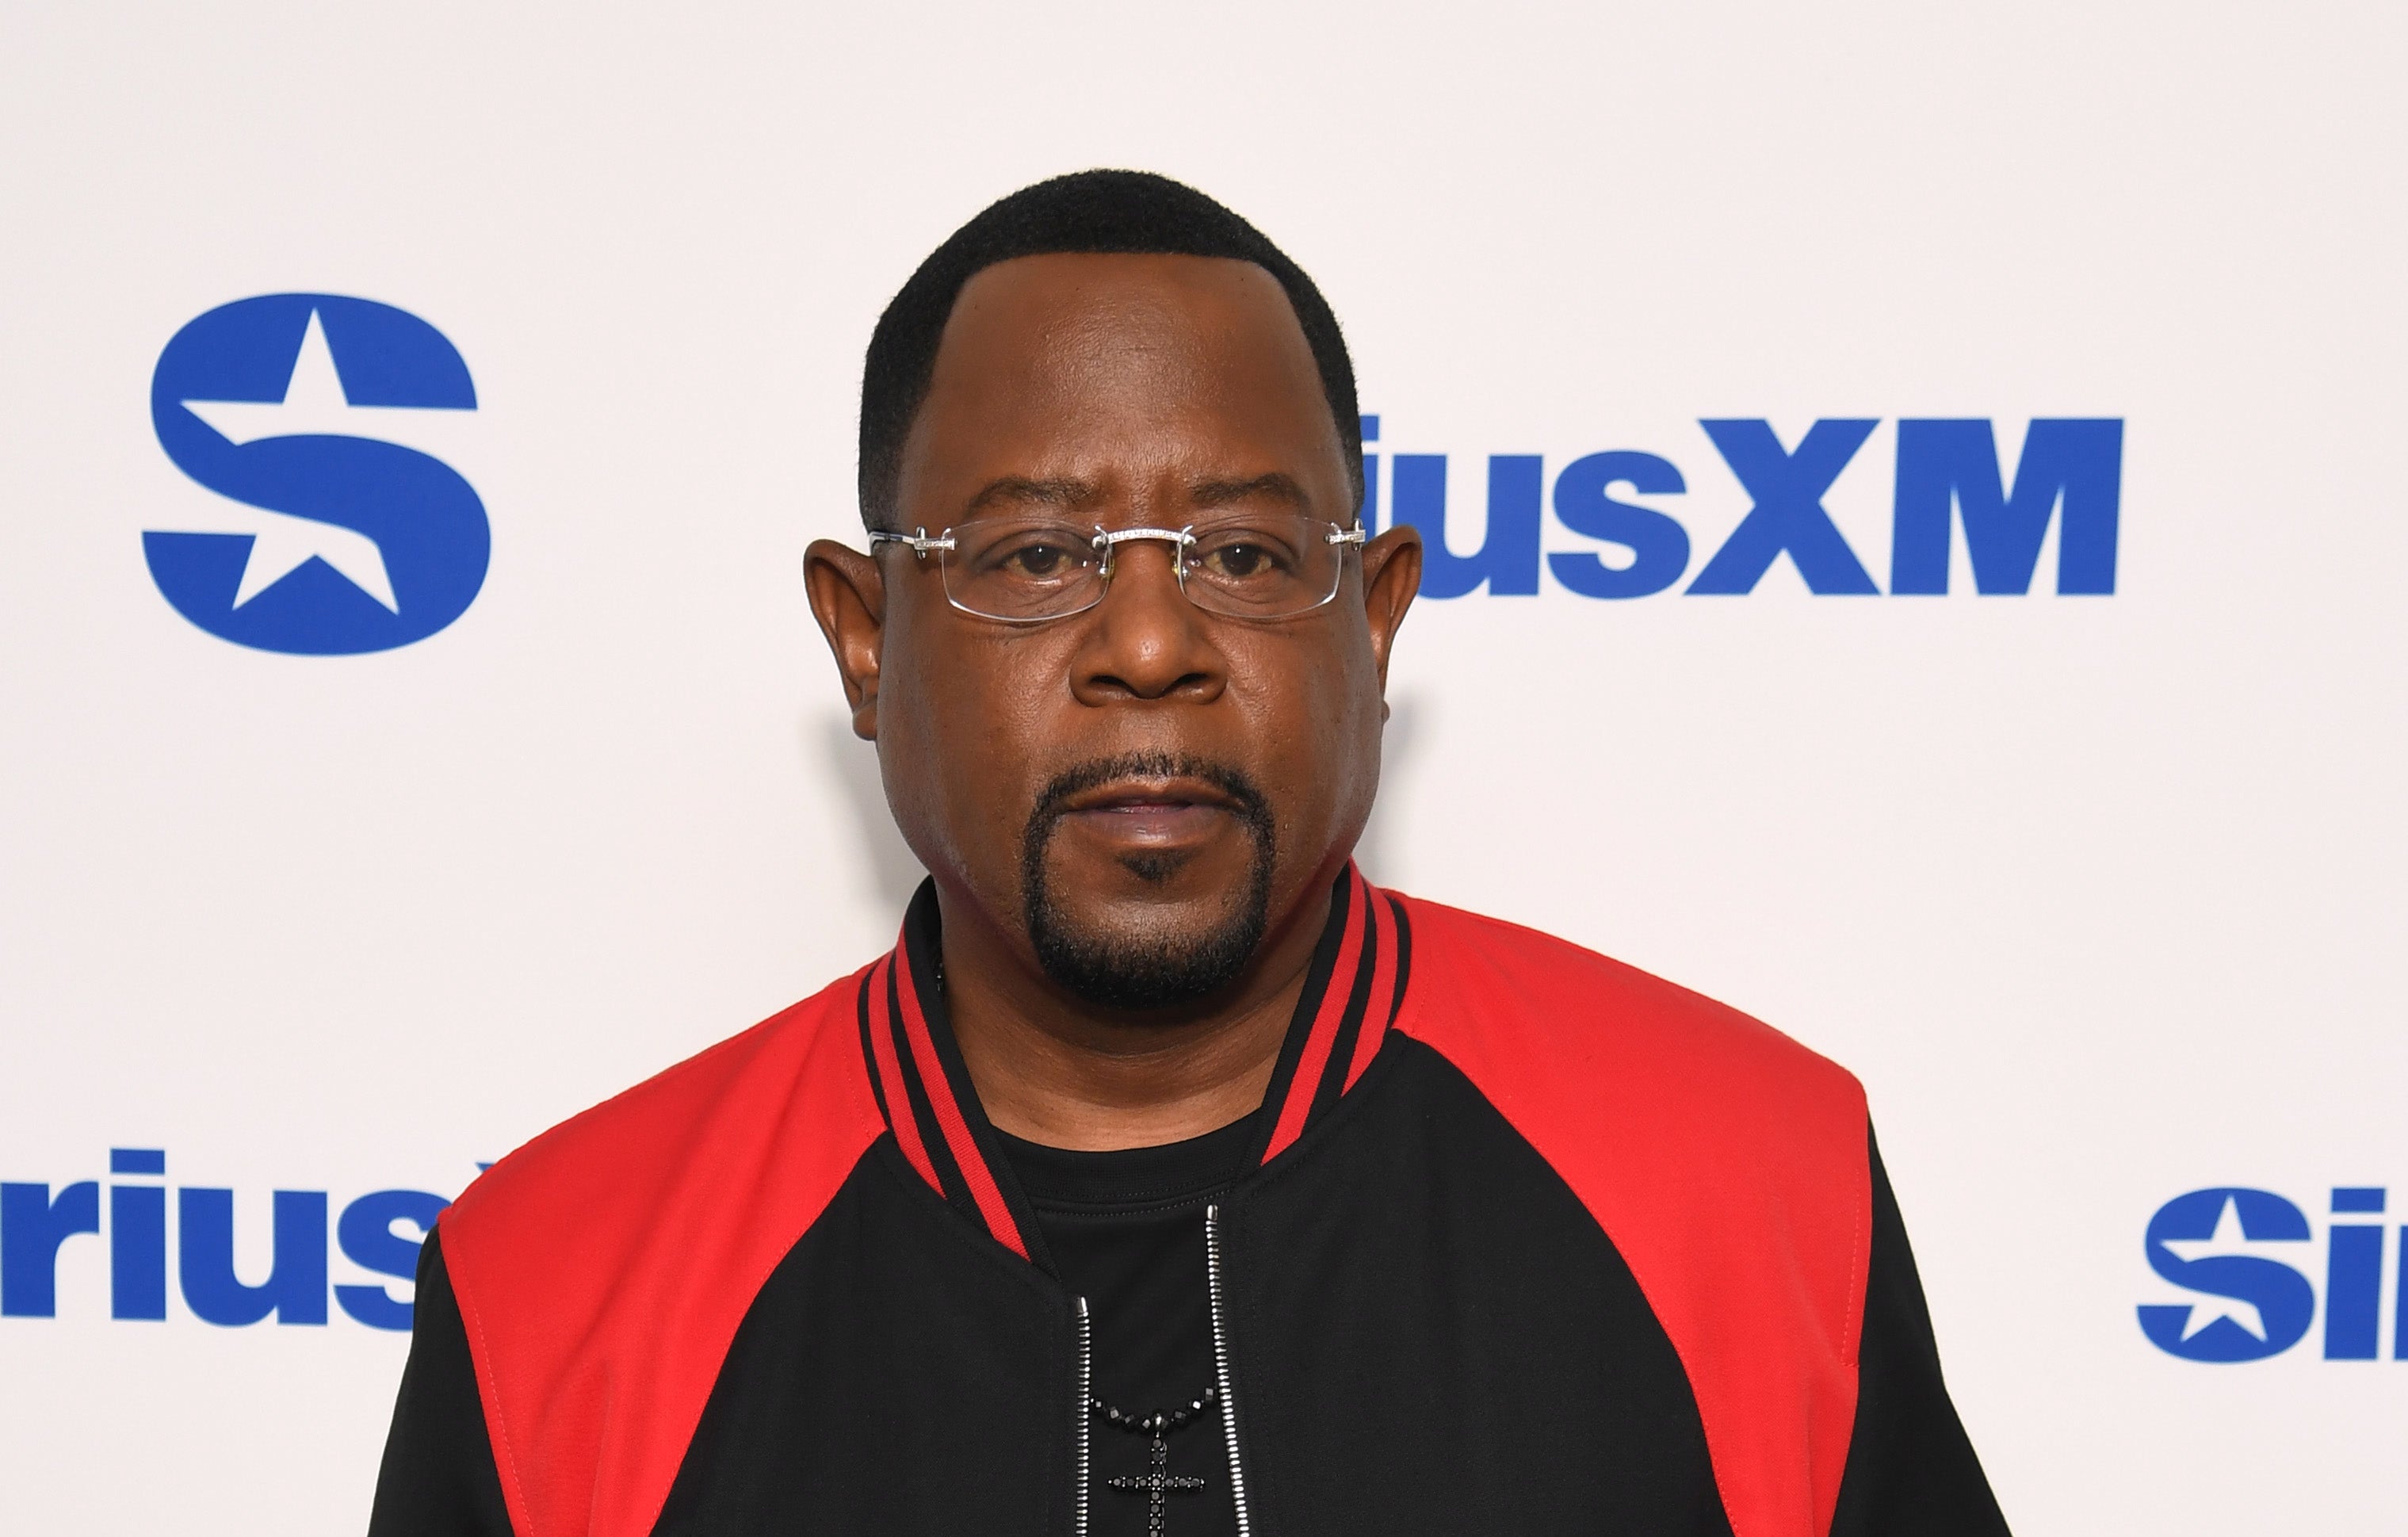 Martin Lawrence shut down fan concern saying: ‘I’m healthy as hell. Stop the rumors!’